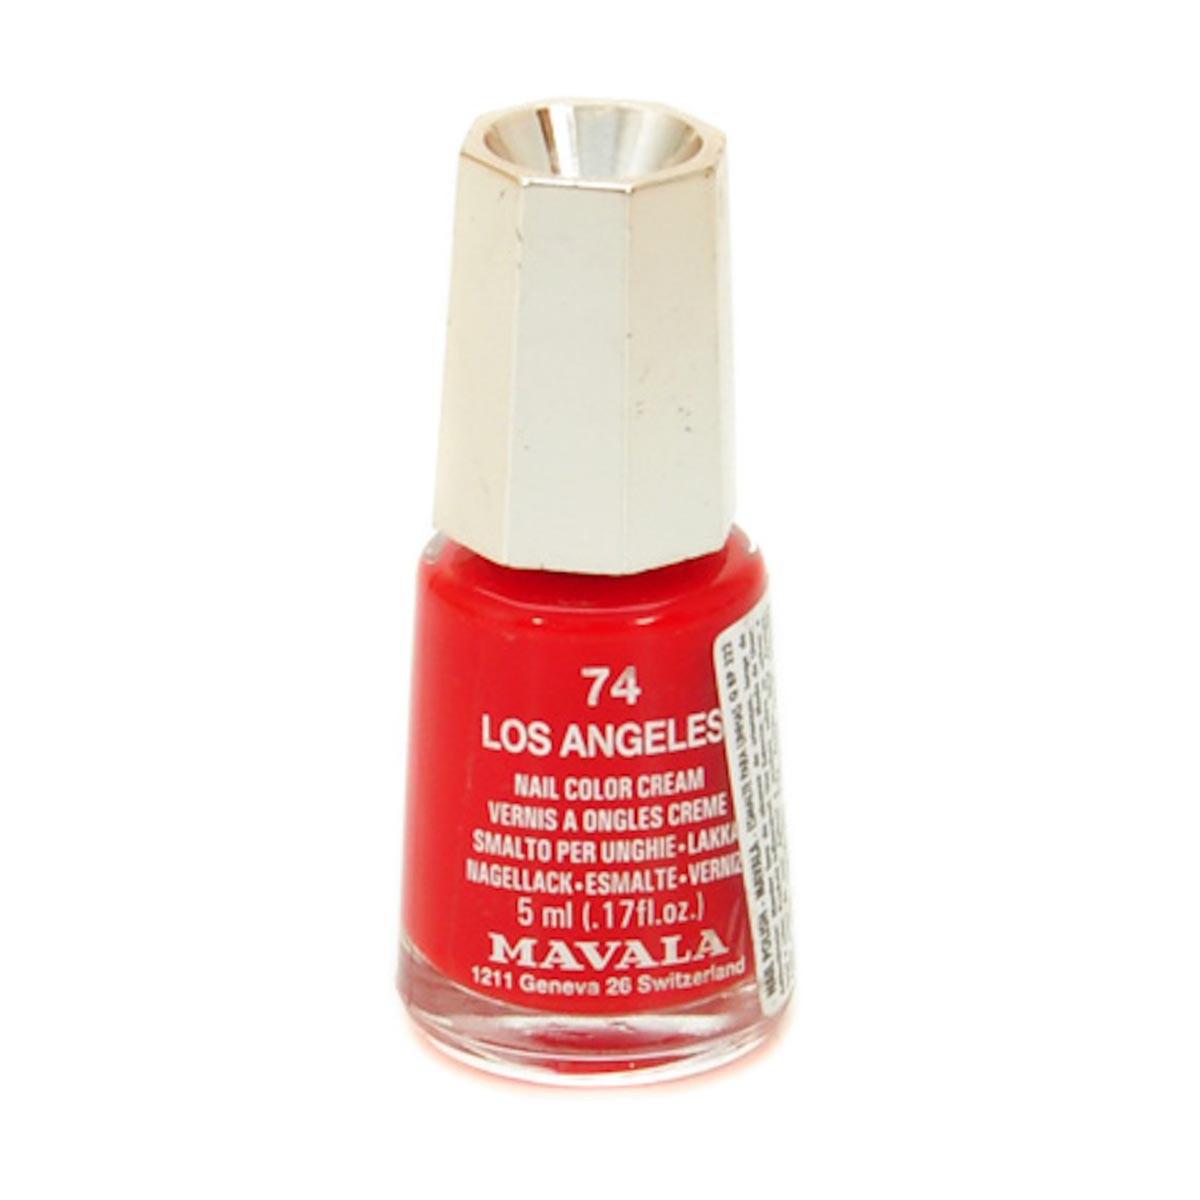 Mavala Fragrances Nail Lacquer 74 Los Angeles Buy And Offers On Dressinn